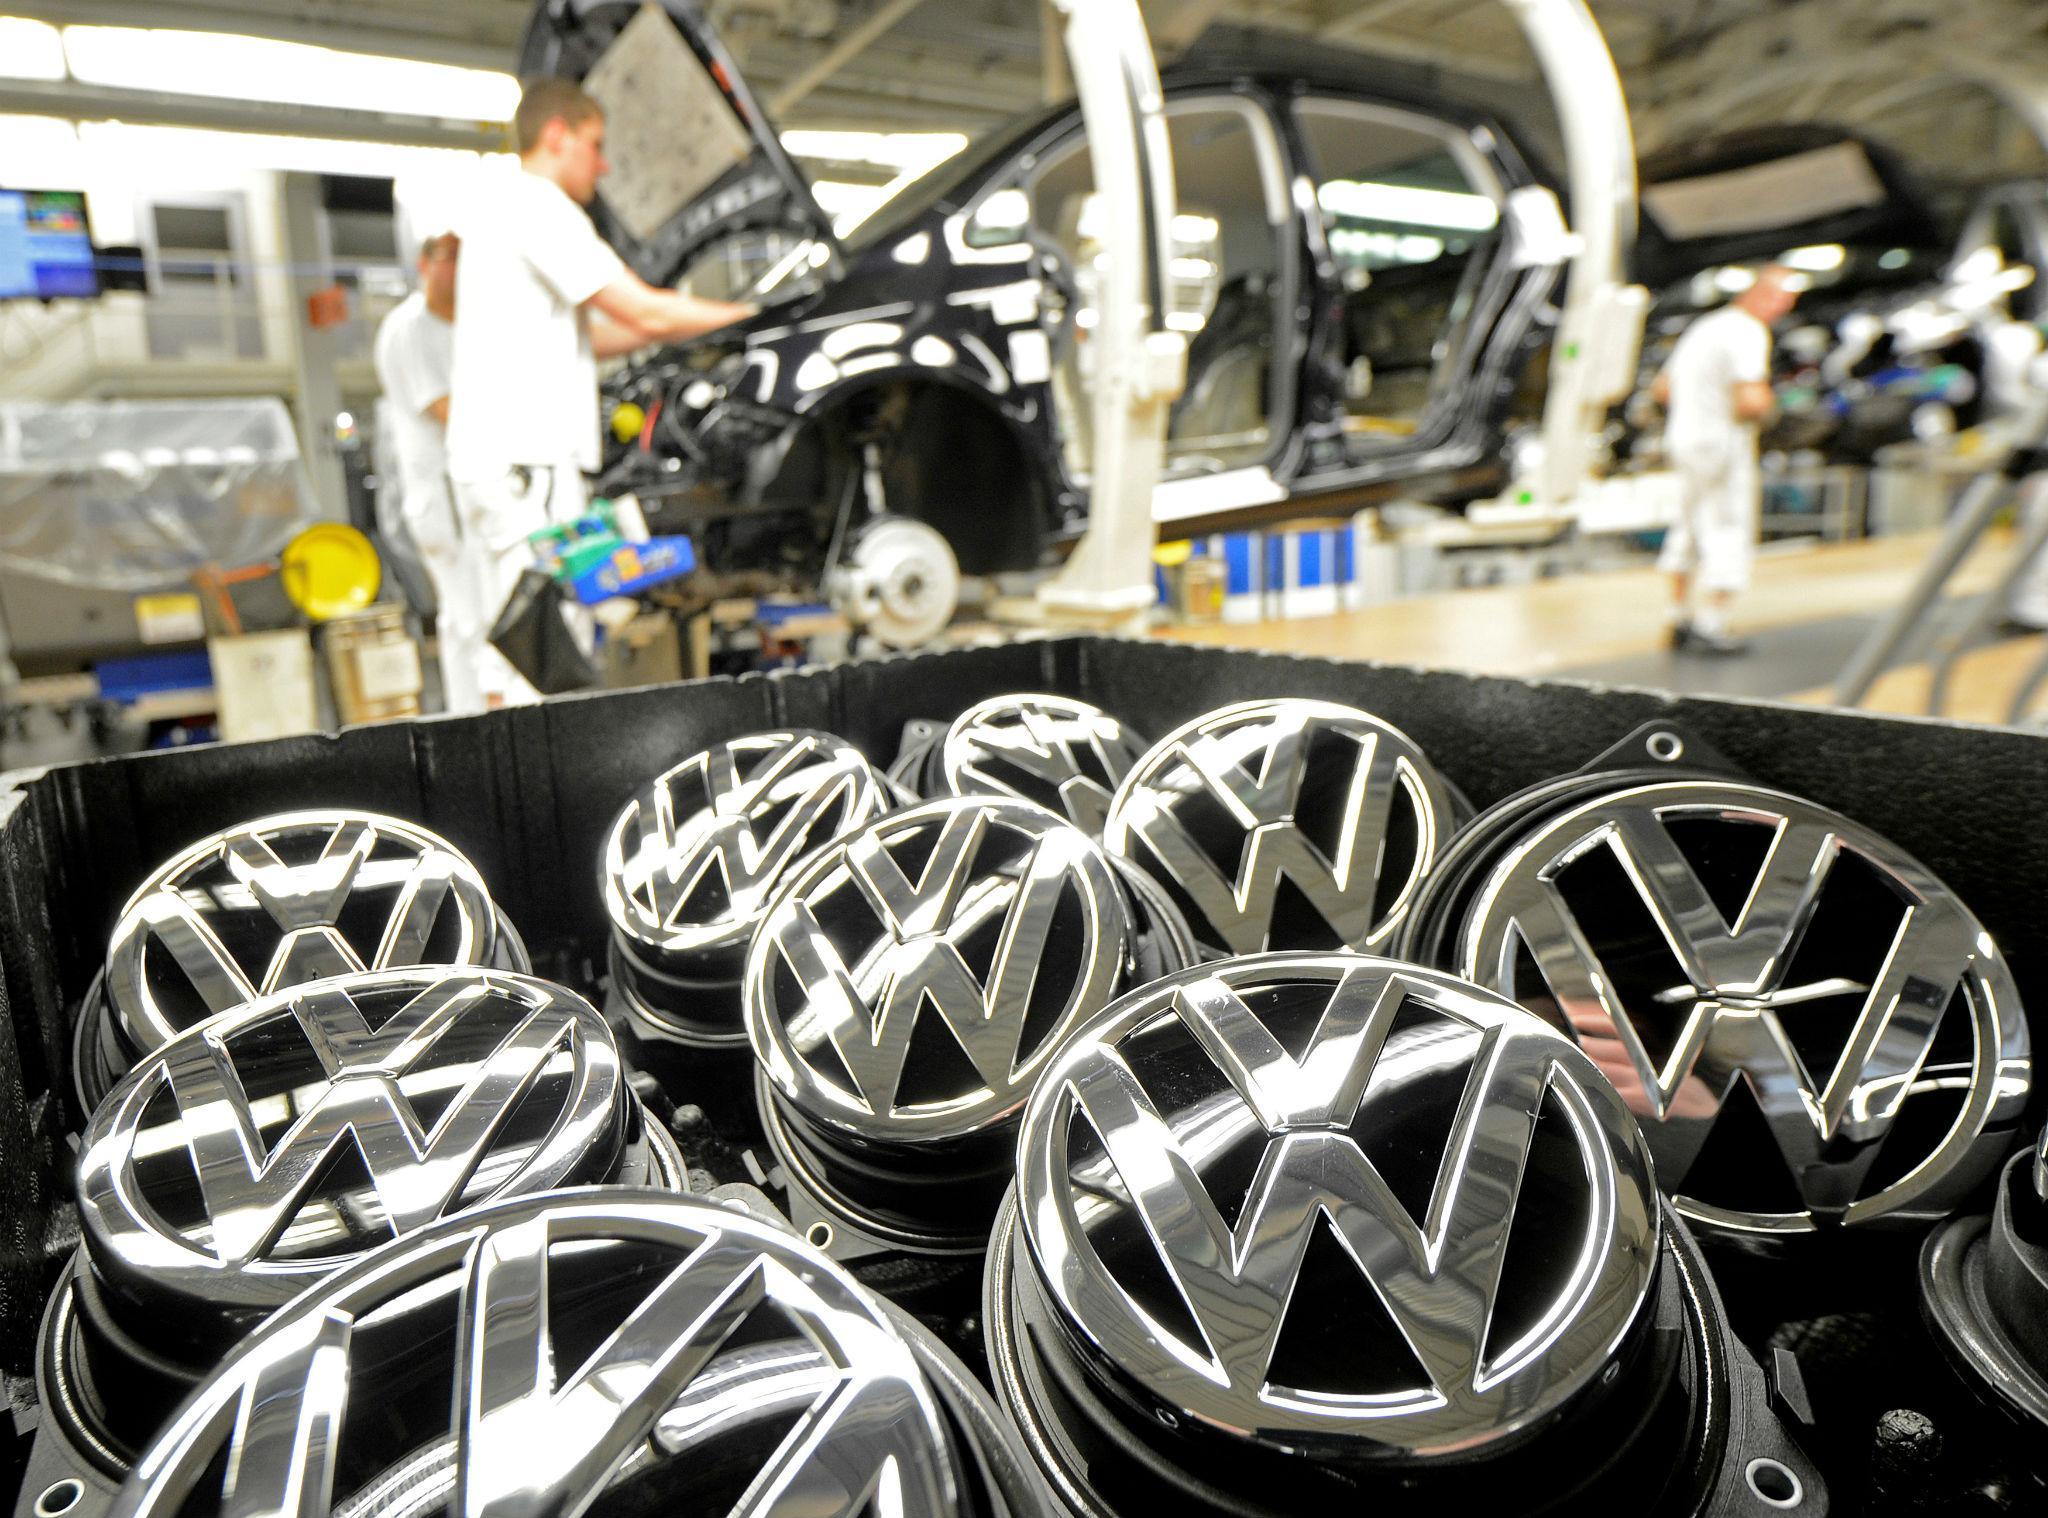 Volkswagen reportedly became aware of the latest fault after an investigation by Chinese authorities launched back in April 2016